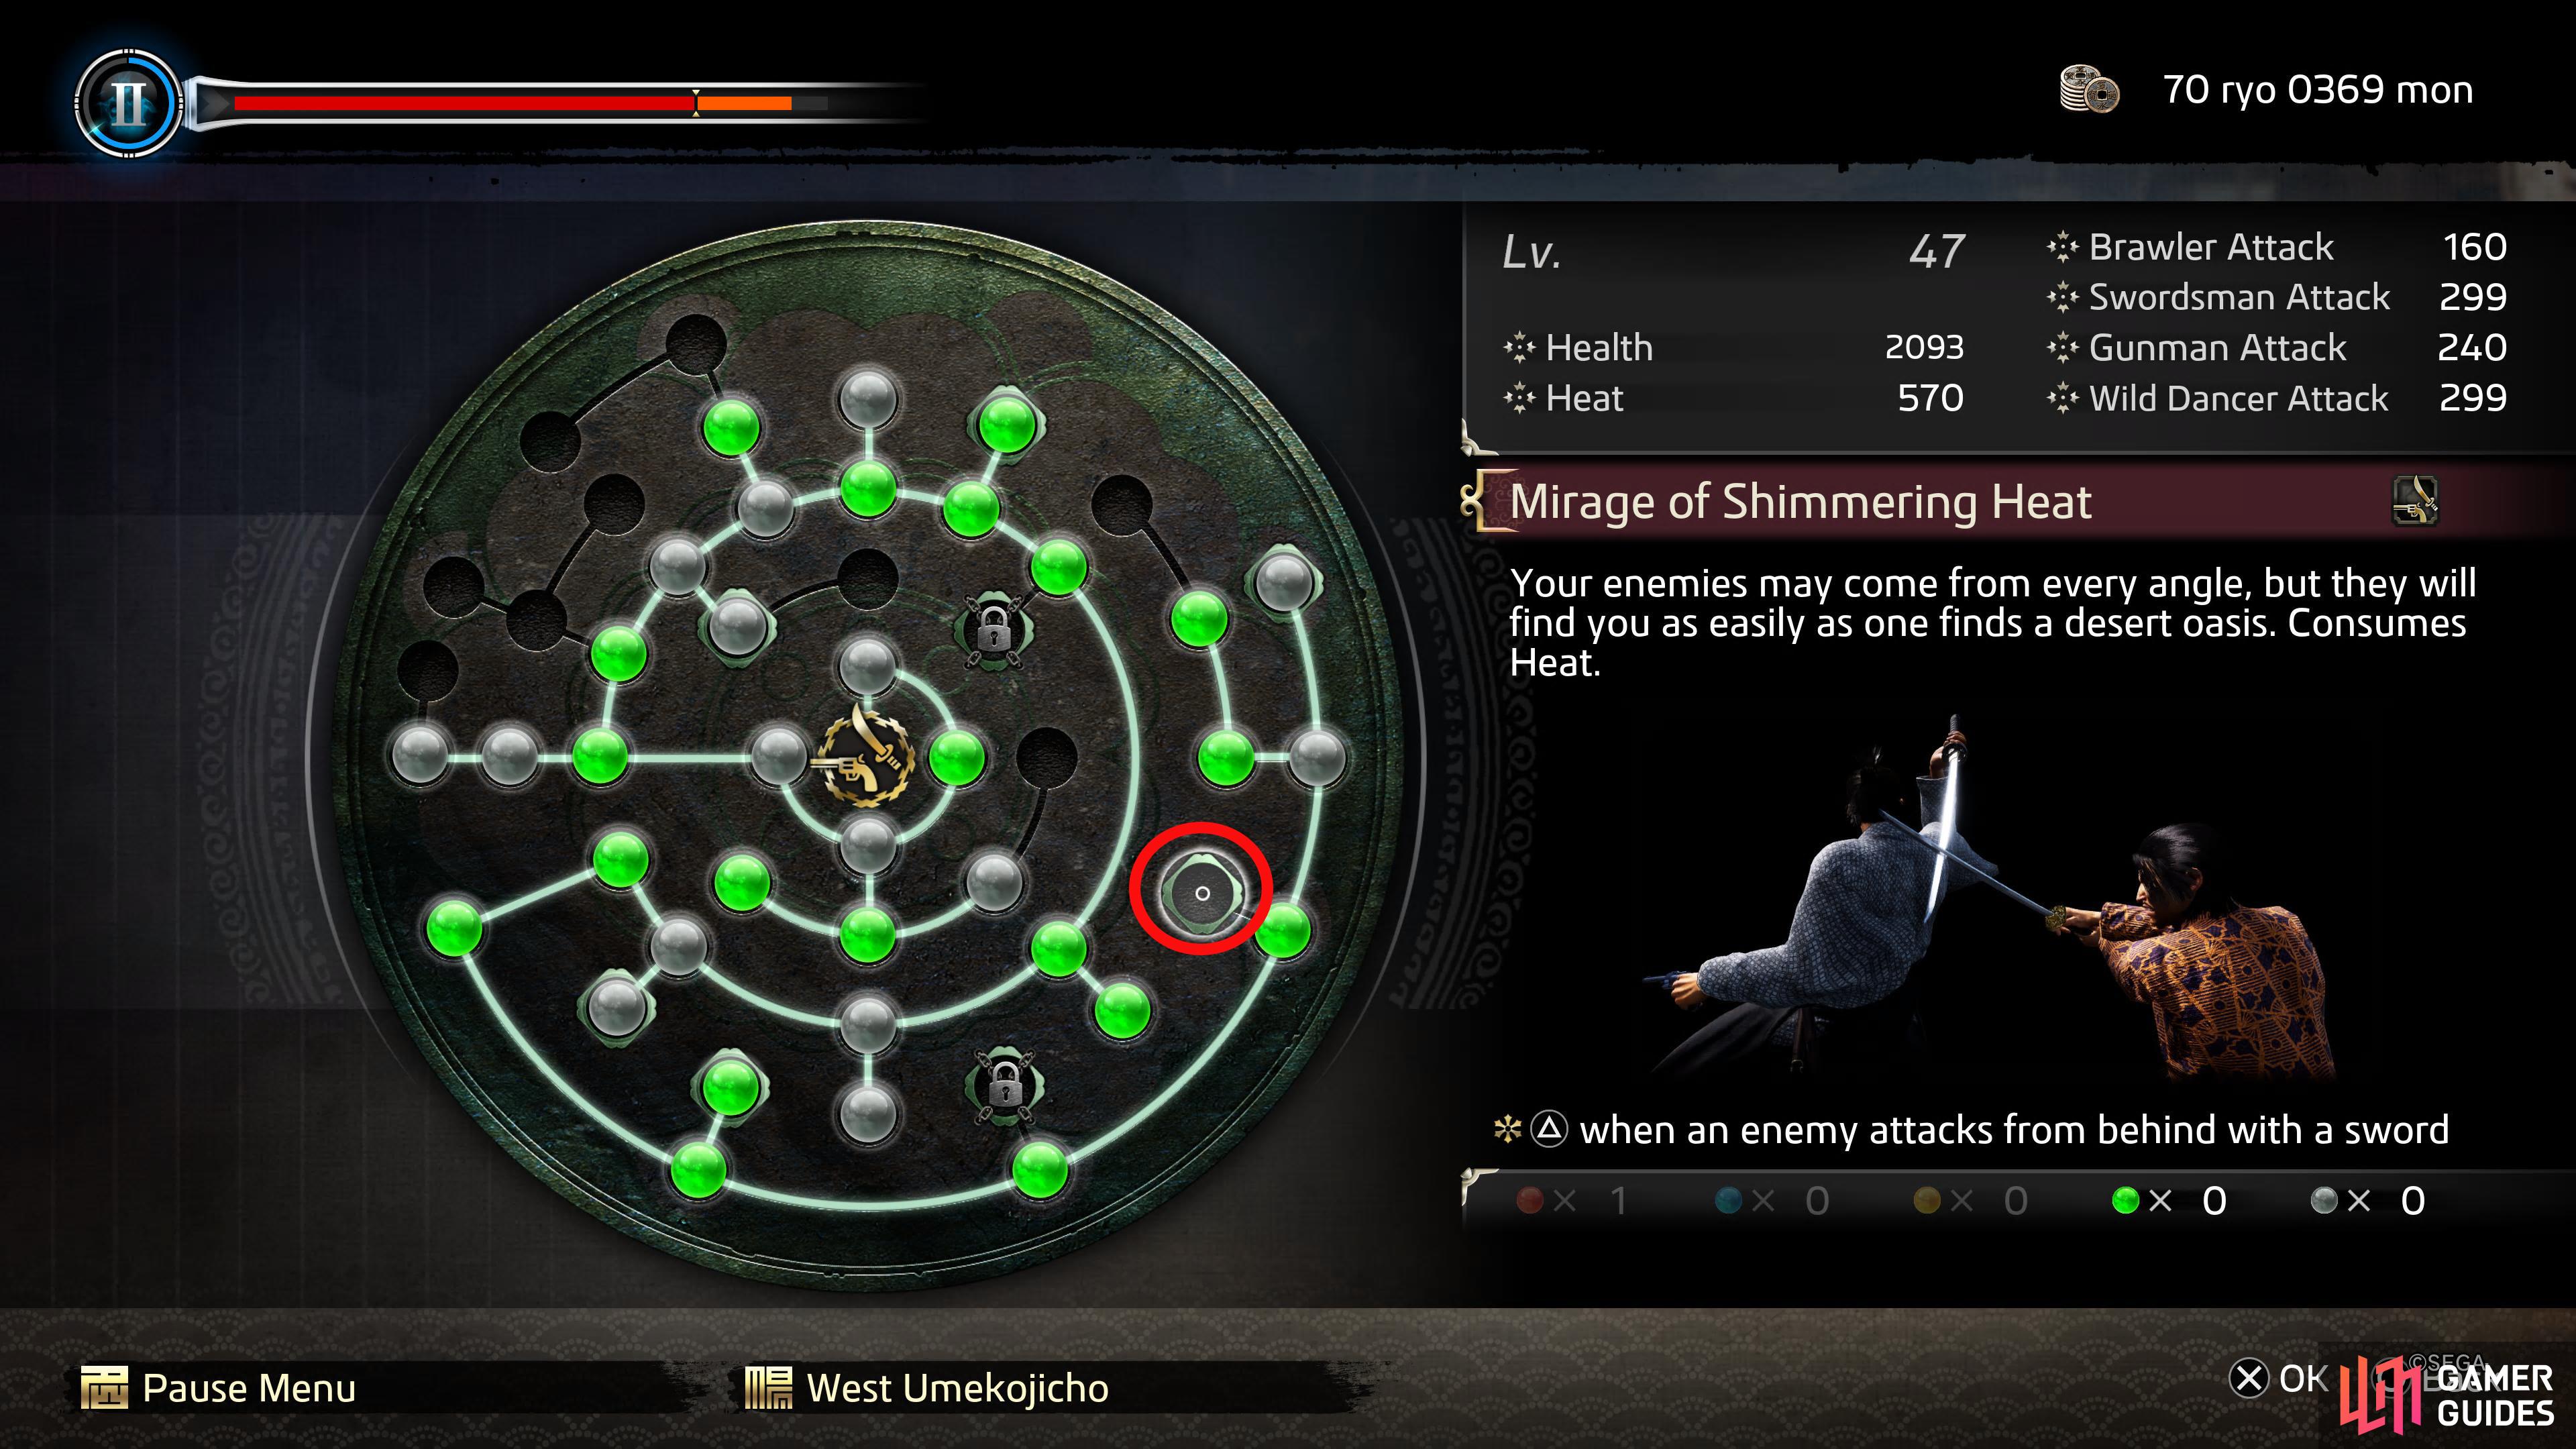 Here's where Mirage of Shimmering Heat appears on the Ability Wheel.